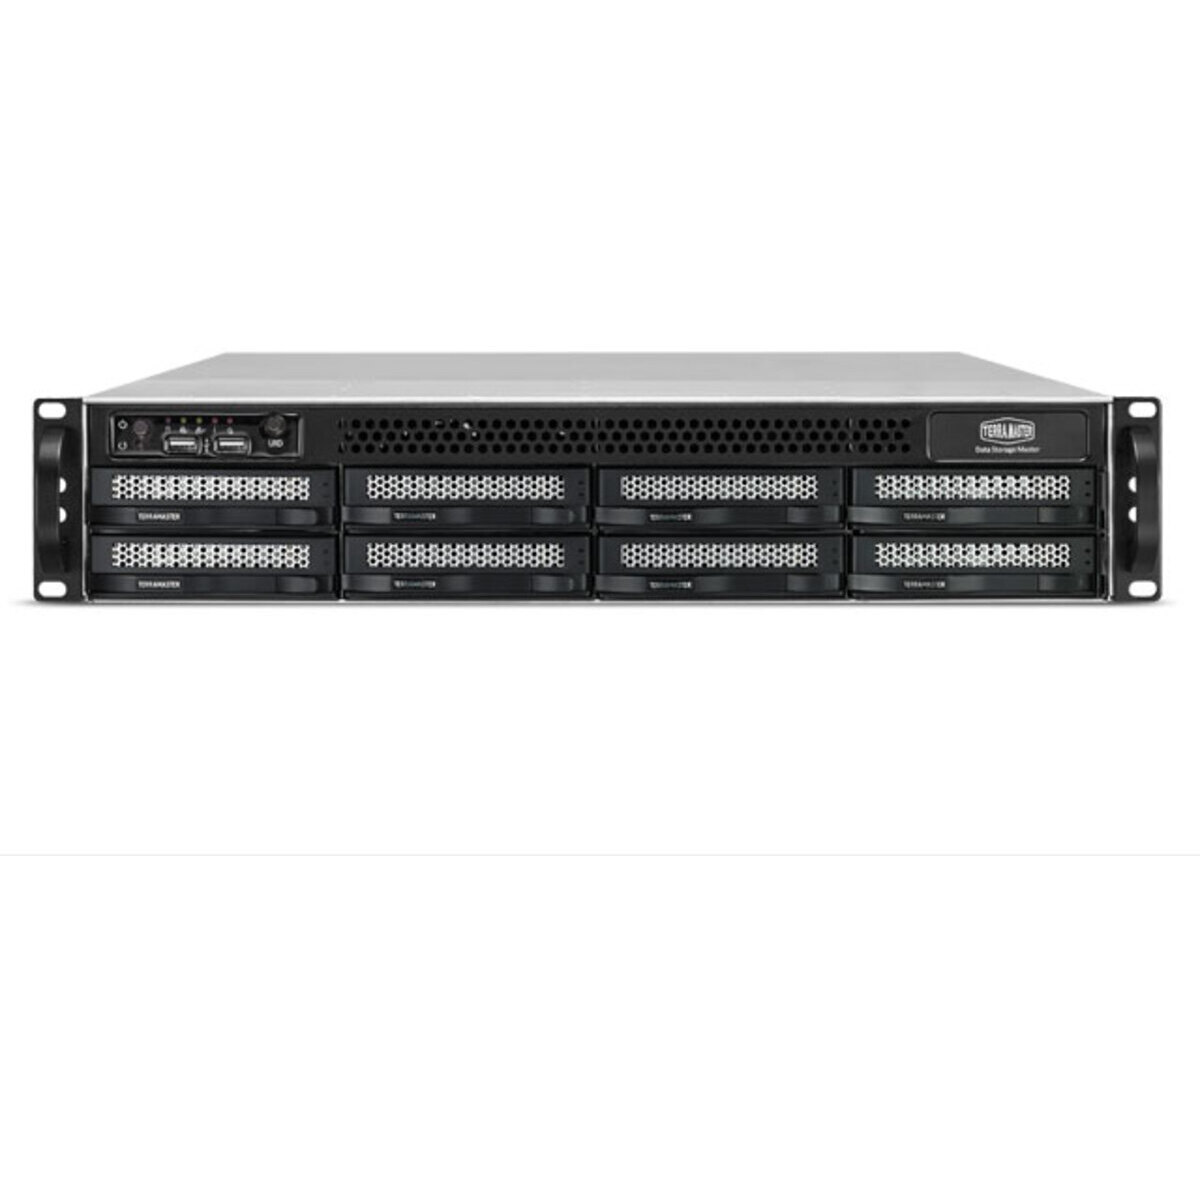 TerraMaster U8-522-9400 96tb 8-Bay RackMount Large Business / Enterprise NAS - Network Attached Storage Device 8x12tb Seagate IronWolf Pro ST12000NT001 3.5 7200rpm SATA 6Gb/s HDD NAS Class Drives Installed - Burn-In Tested - ON SALE U8-522-9400